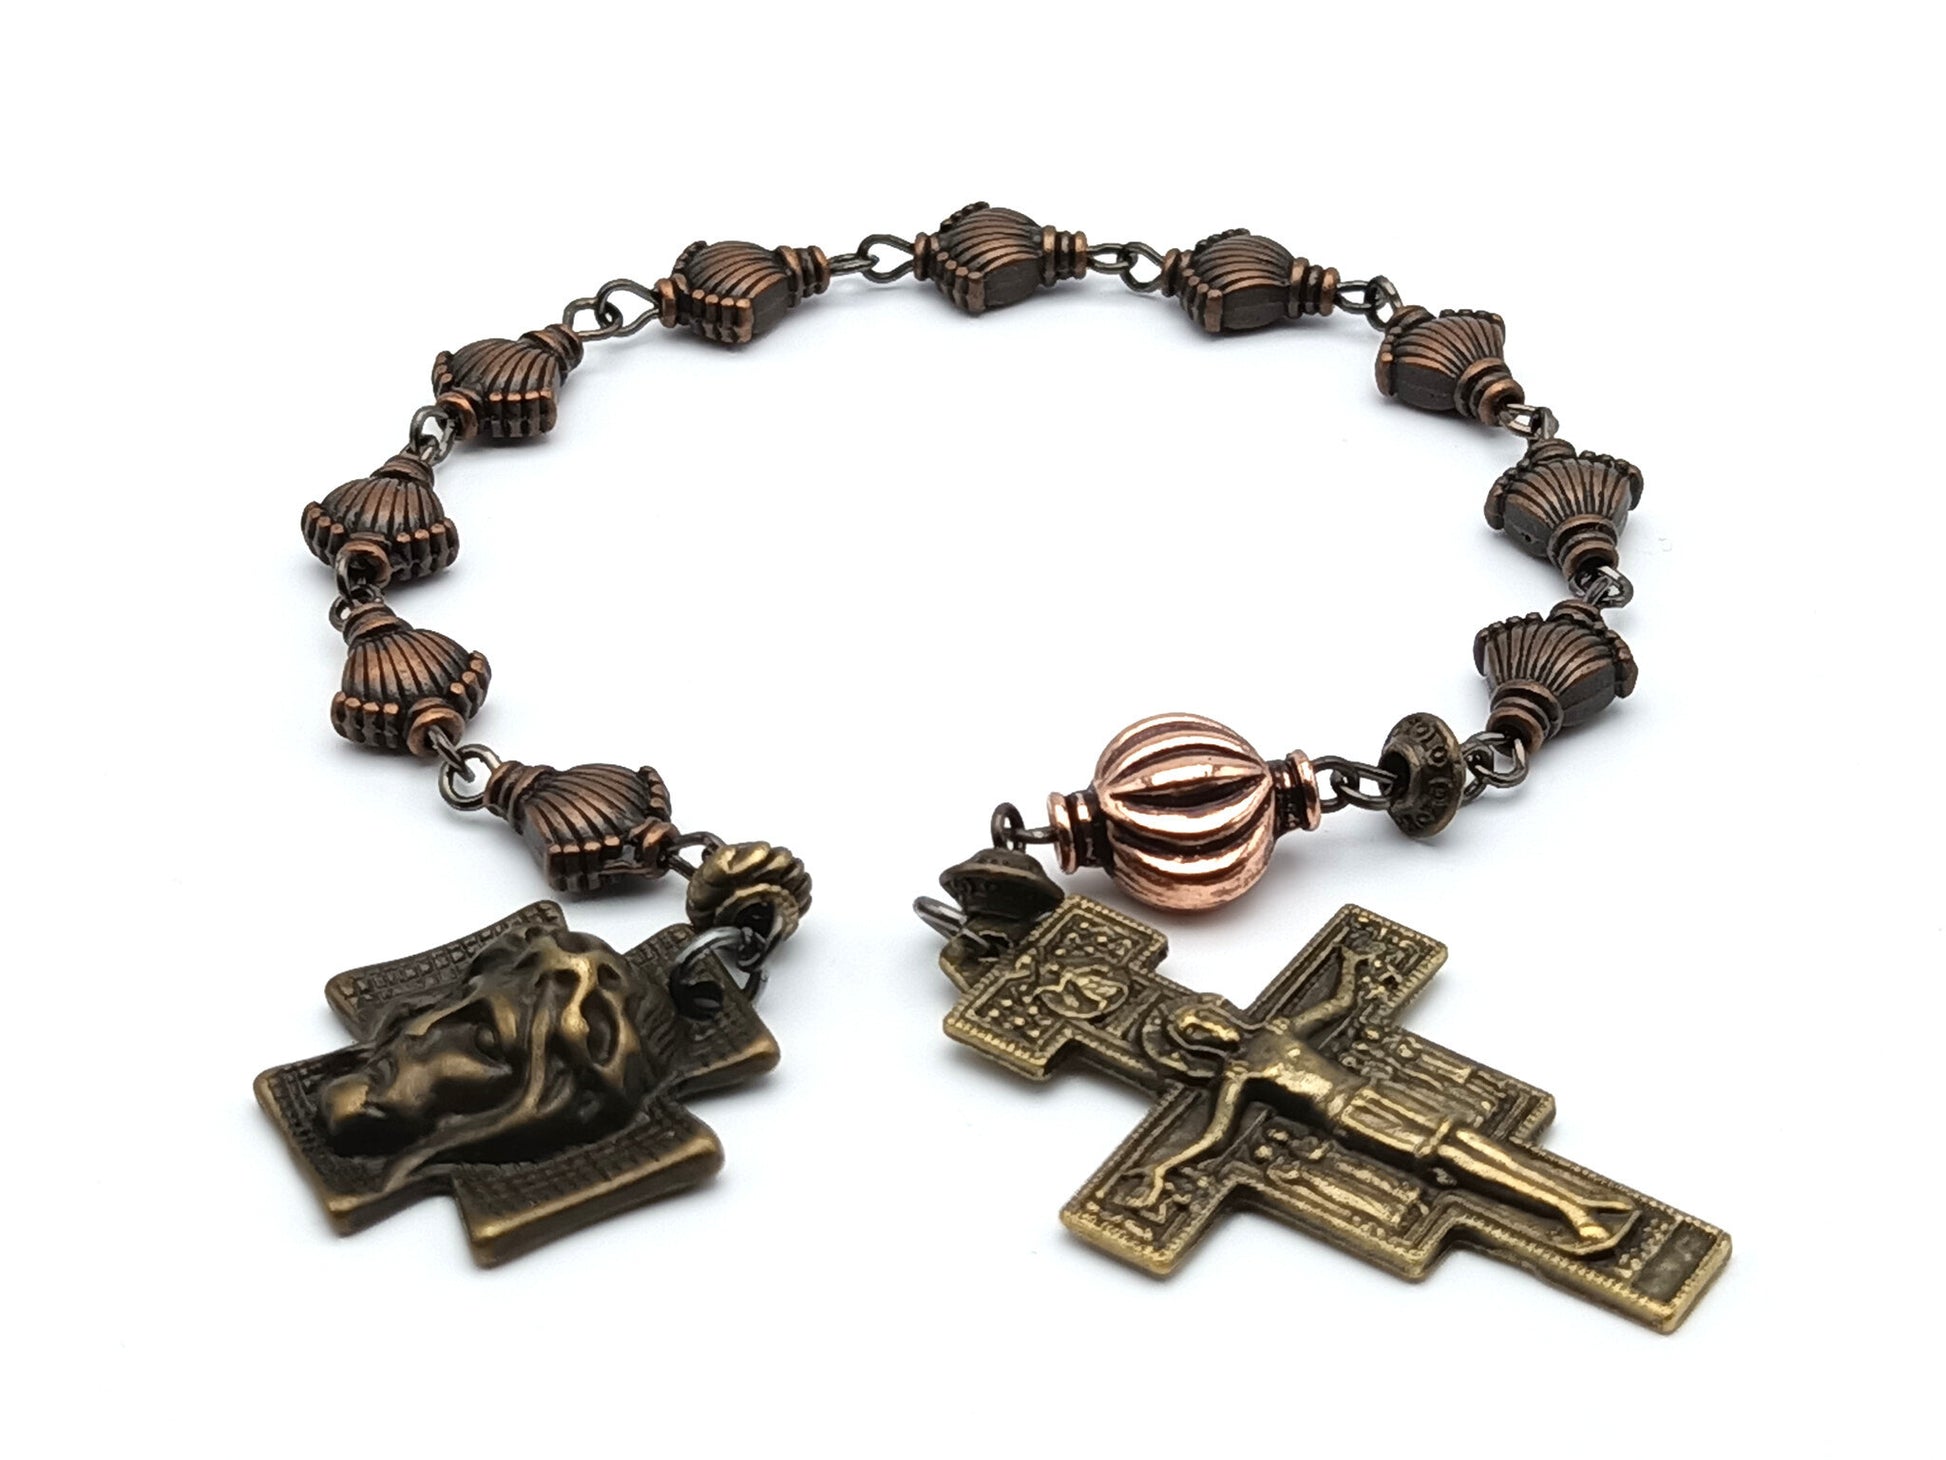 Holy Face of Jesus unique rosary beads single decade with copper metal beads, bronze Holy face medal and crucifix.